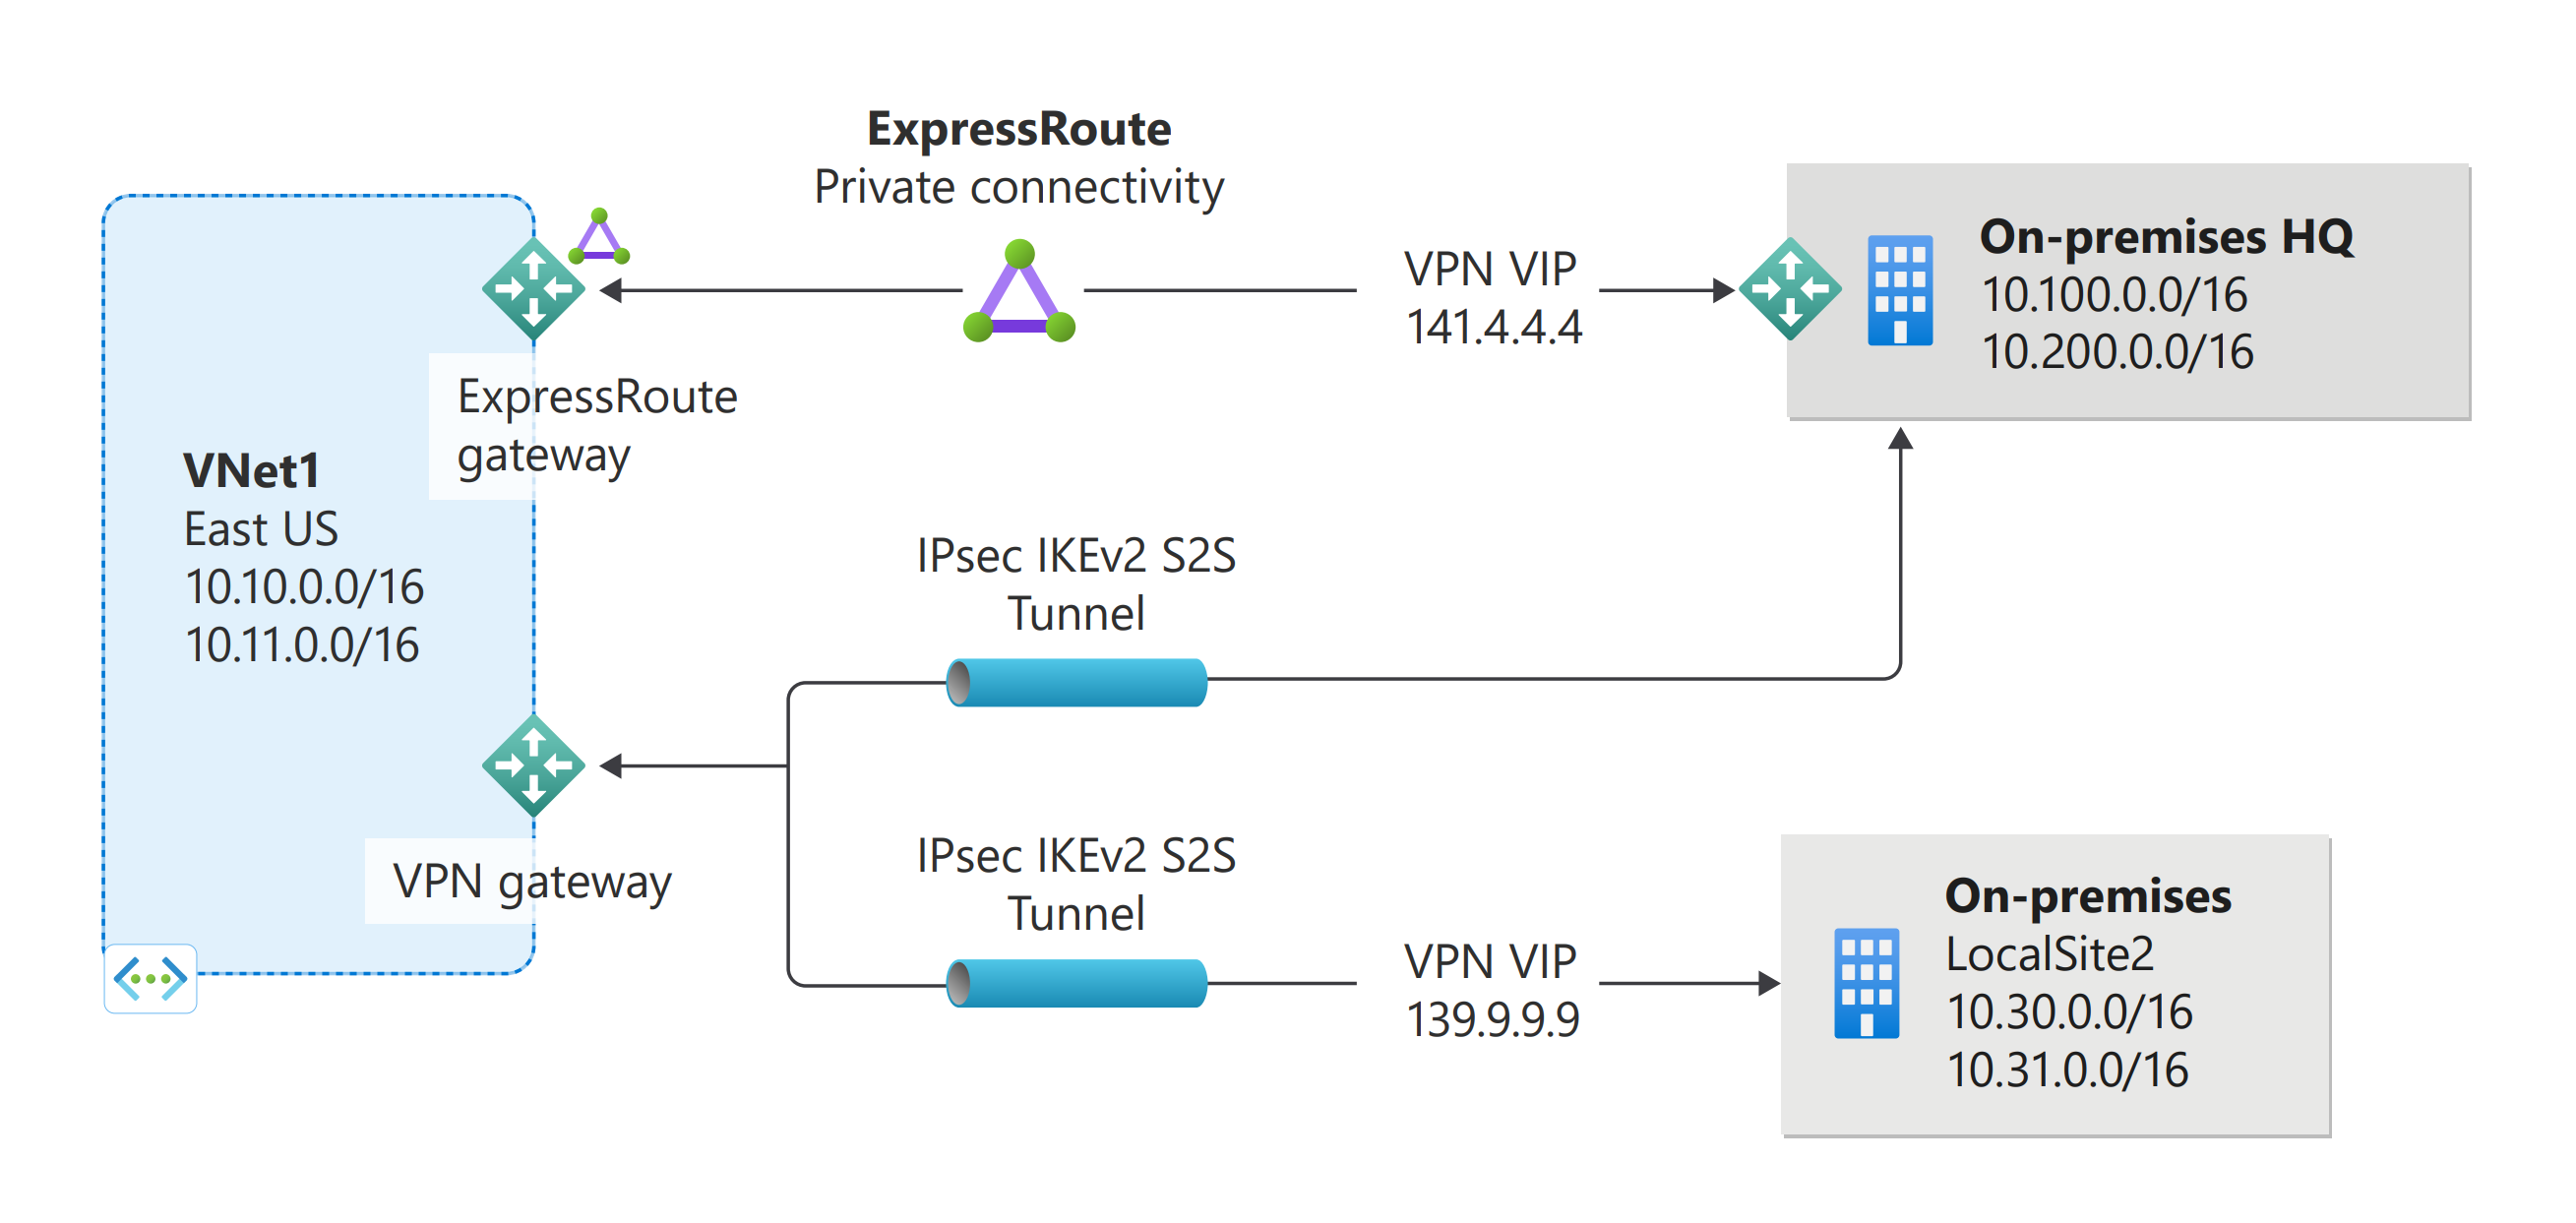 Diagram of ExpressRoute and VPN Gateway coexisting connections.